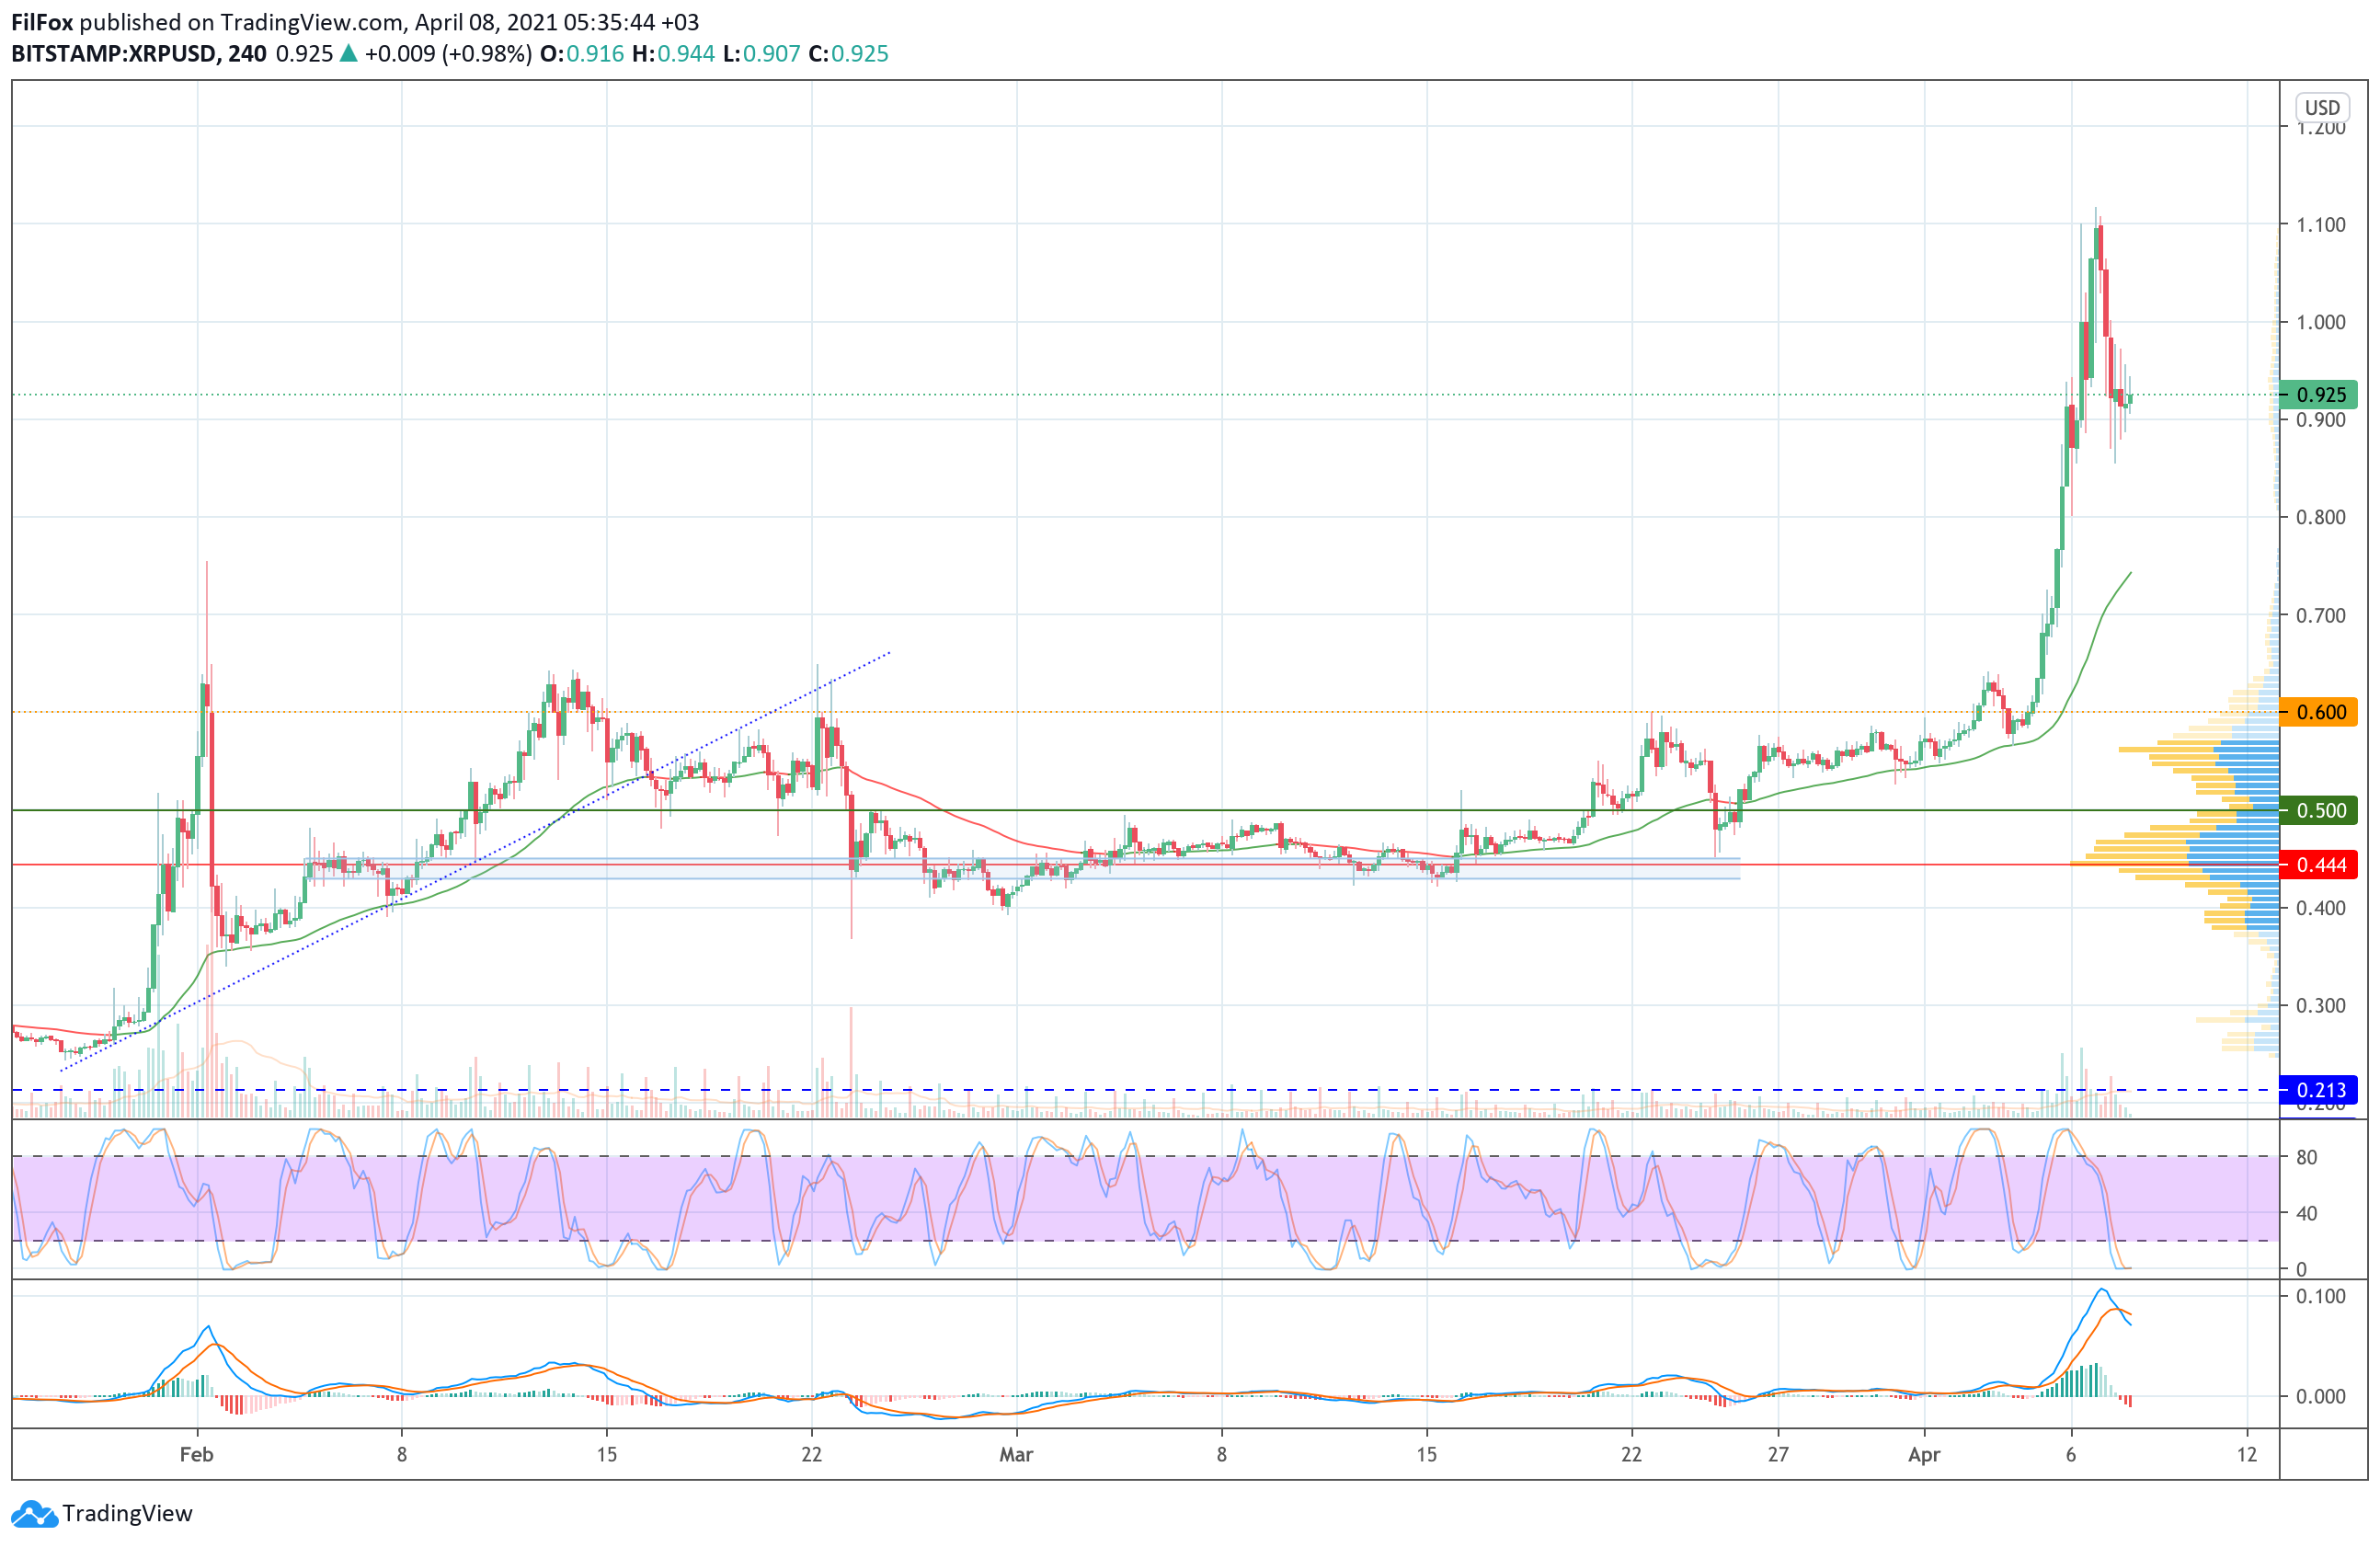 Analysis of the prices of Bitcoin, Ethereum, XRP for 04/08/2021